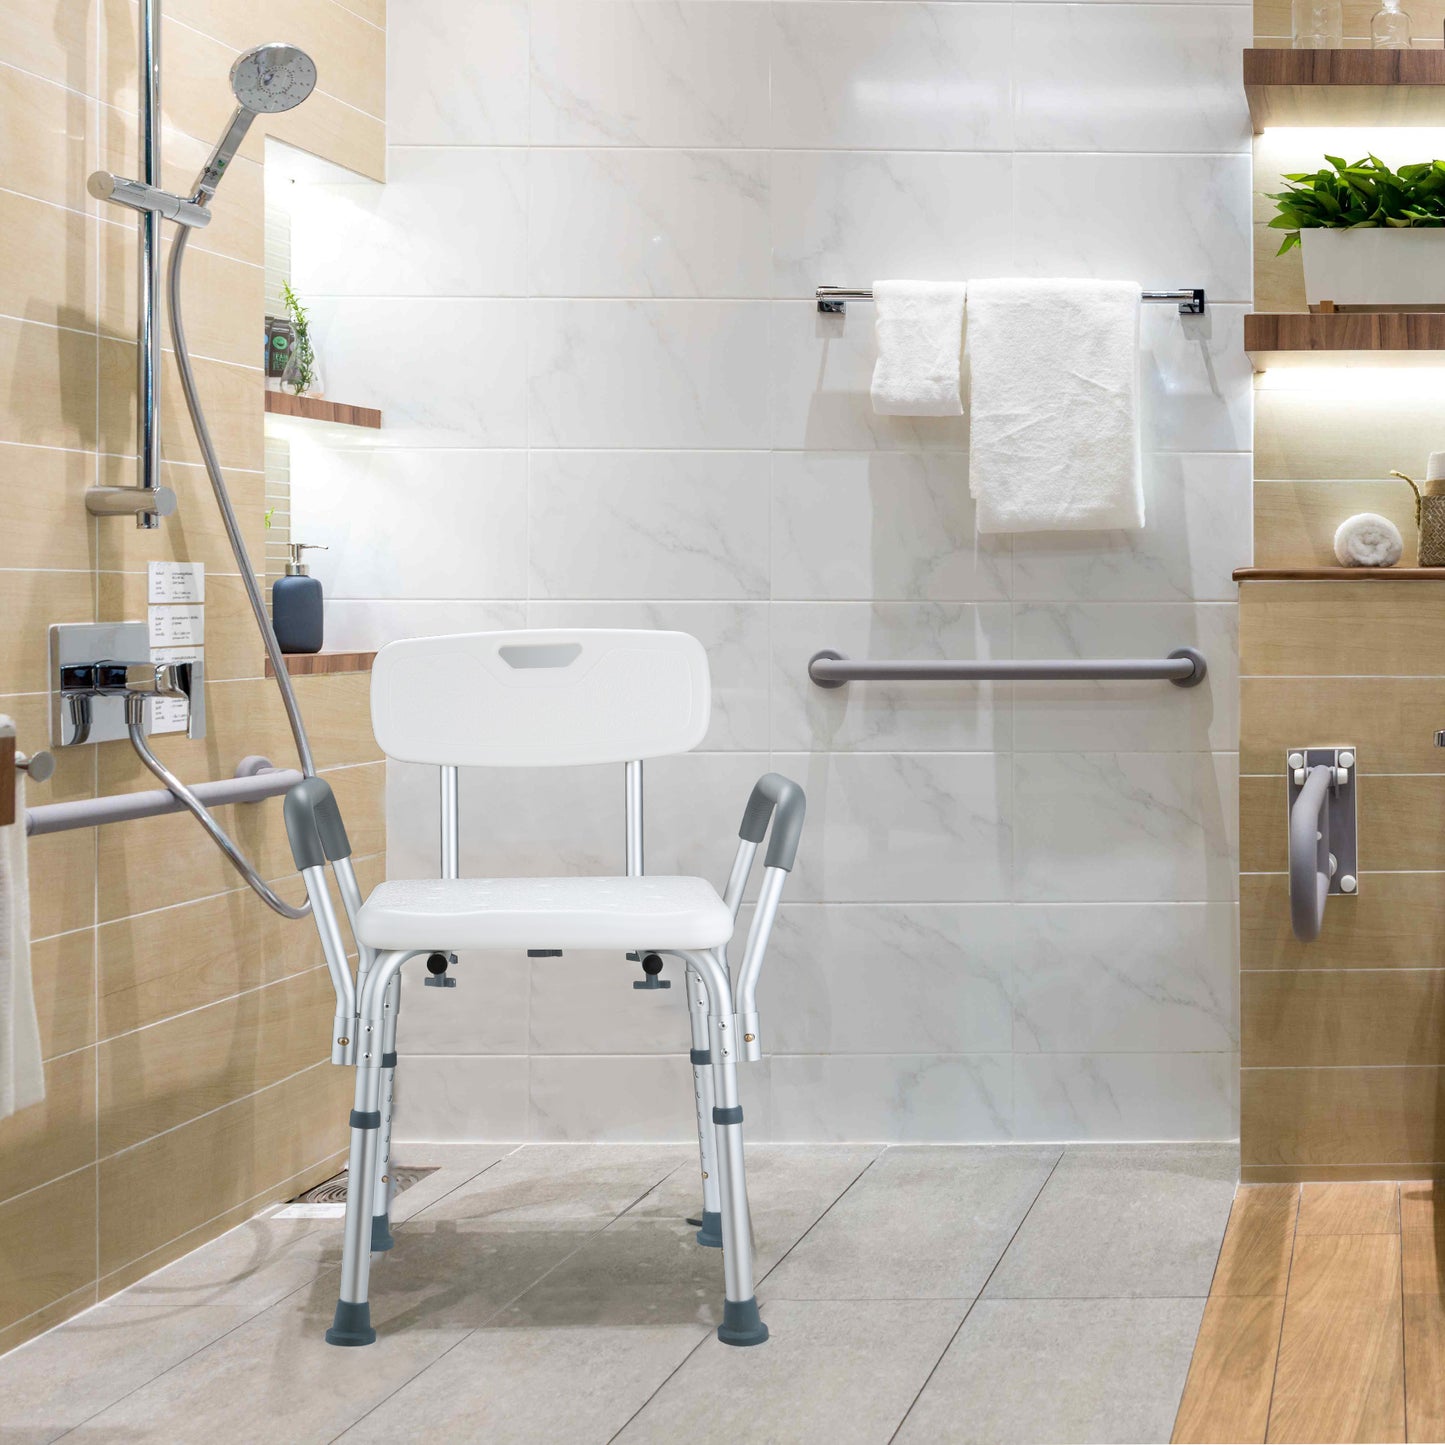 Height Adjustable Shower Chair with Detachable Armrests Backrest, Bath Chair for Seniors, Pregnant Women, Disabled